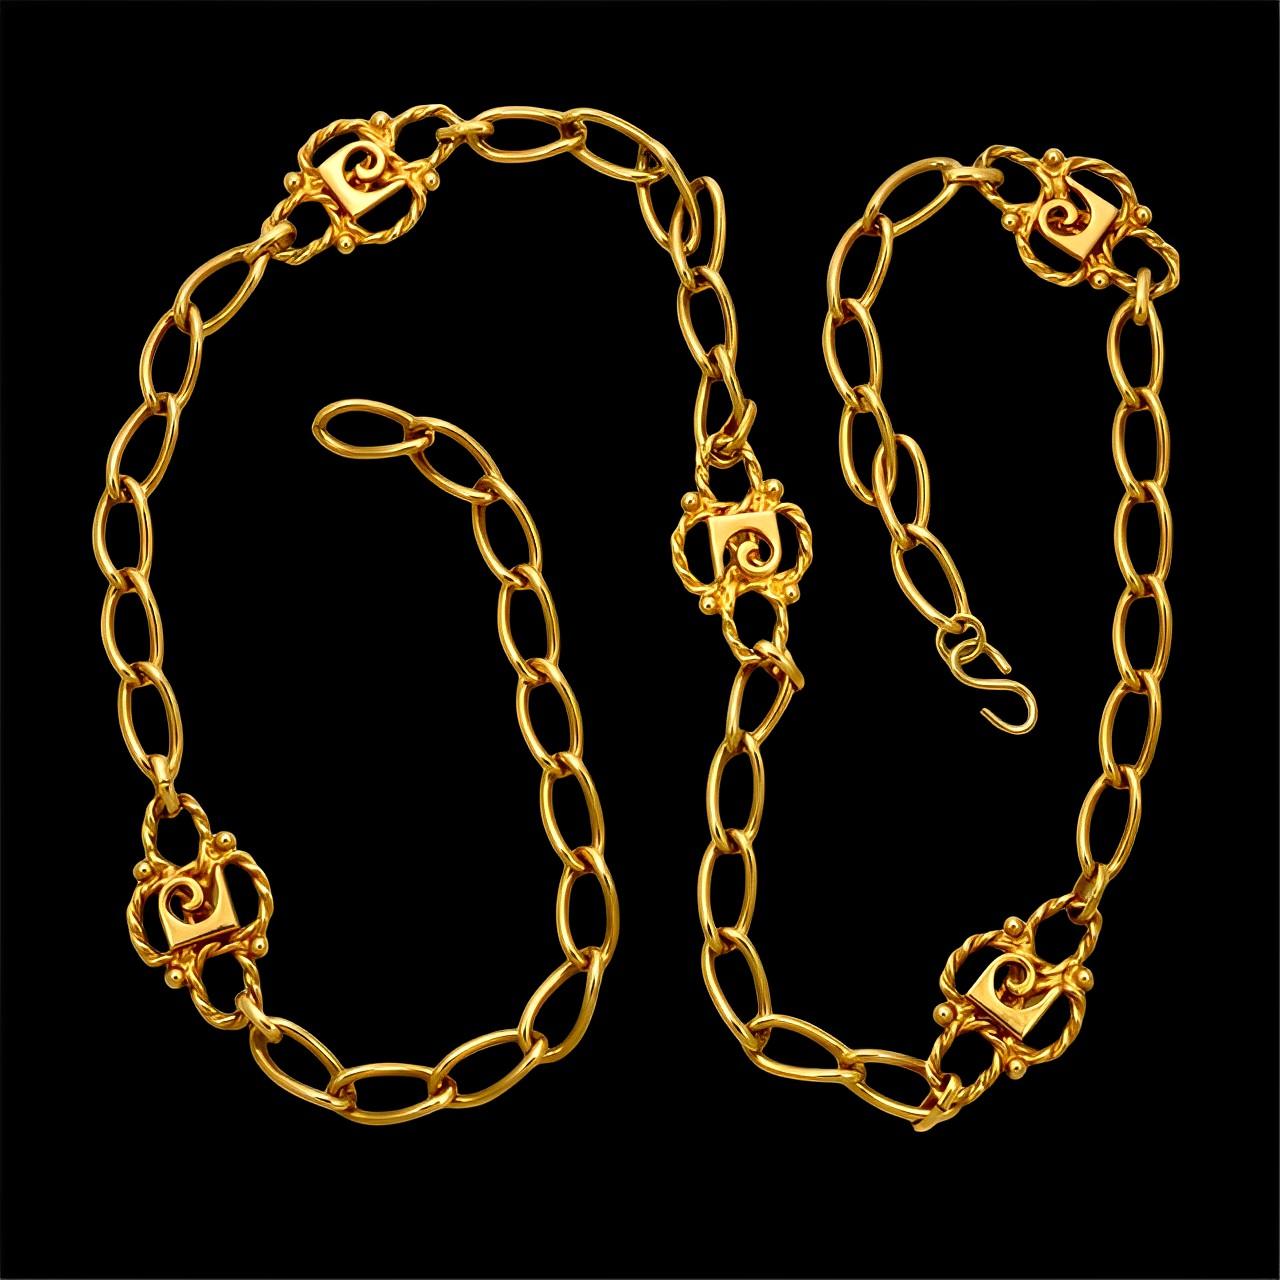 Pierre Cardin Monogram Gold Plated Chain Link Belt circa 1970s For Sale 5